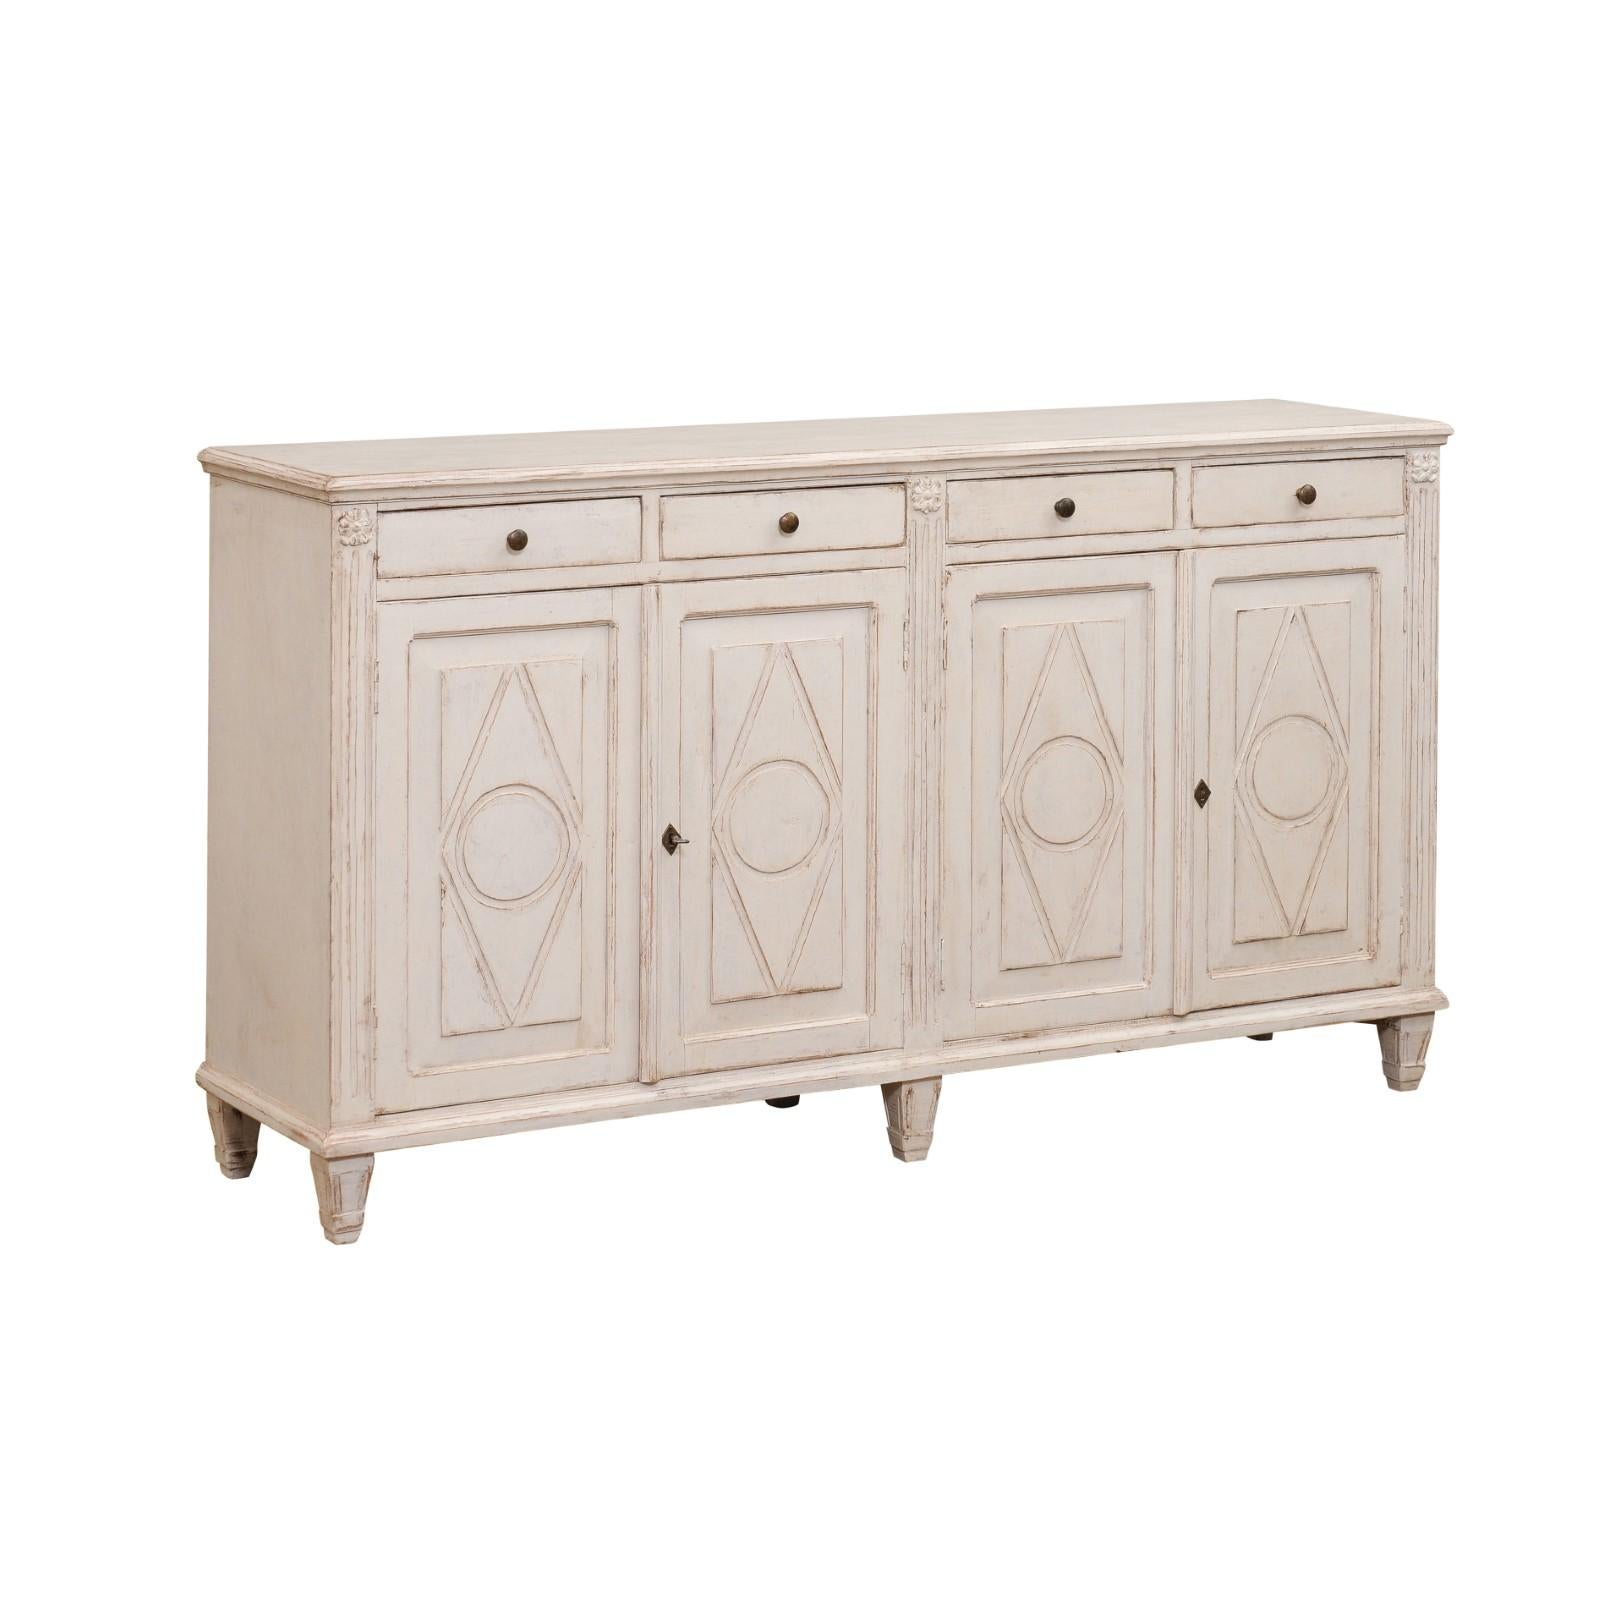 Swedish 19th century Gustavian Style painted enfilade with four drawers over two pairs of double doors. Immerse in the tranquil simplicity of Scandinavian design with this exquisite 19th century Swedish Gustavian Style painted enfilade. Reflecting